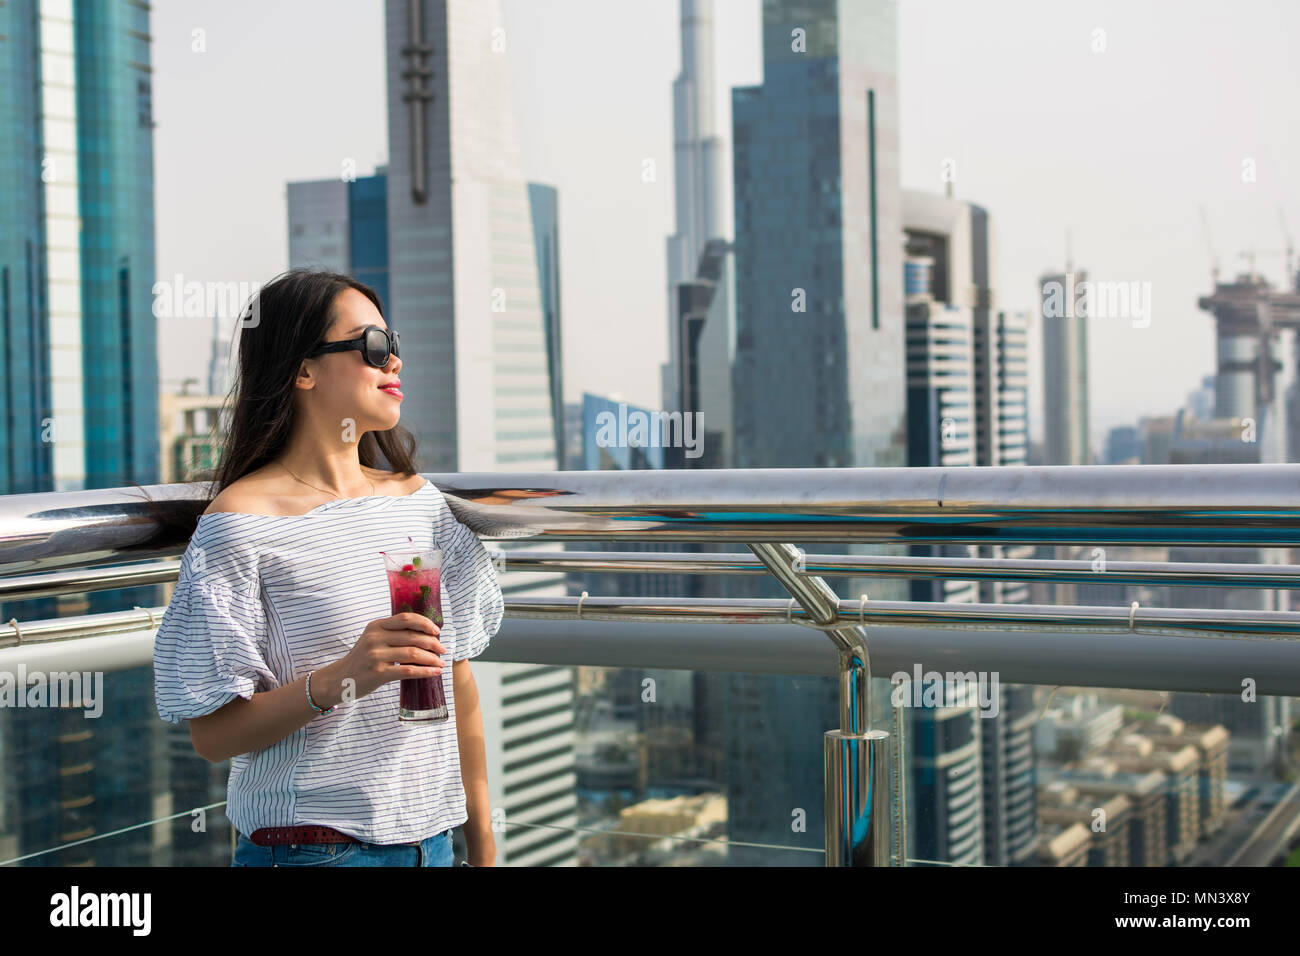 Girl having a drink with Dubai city view Stock Photo